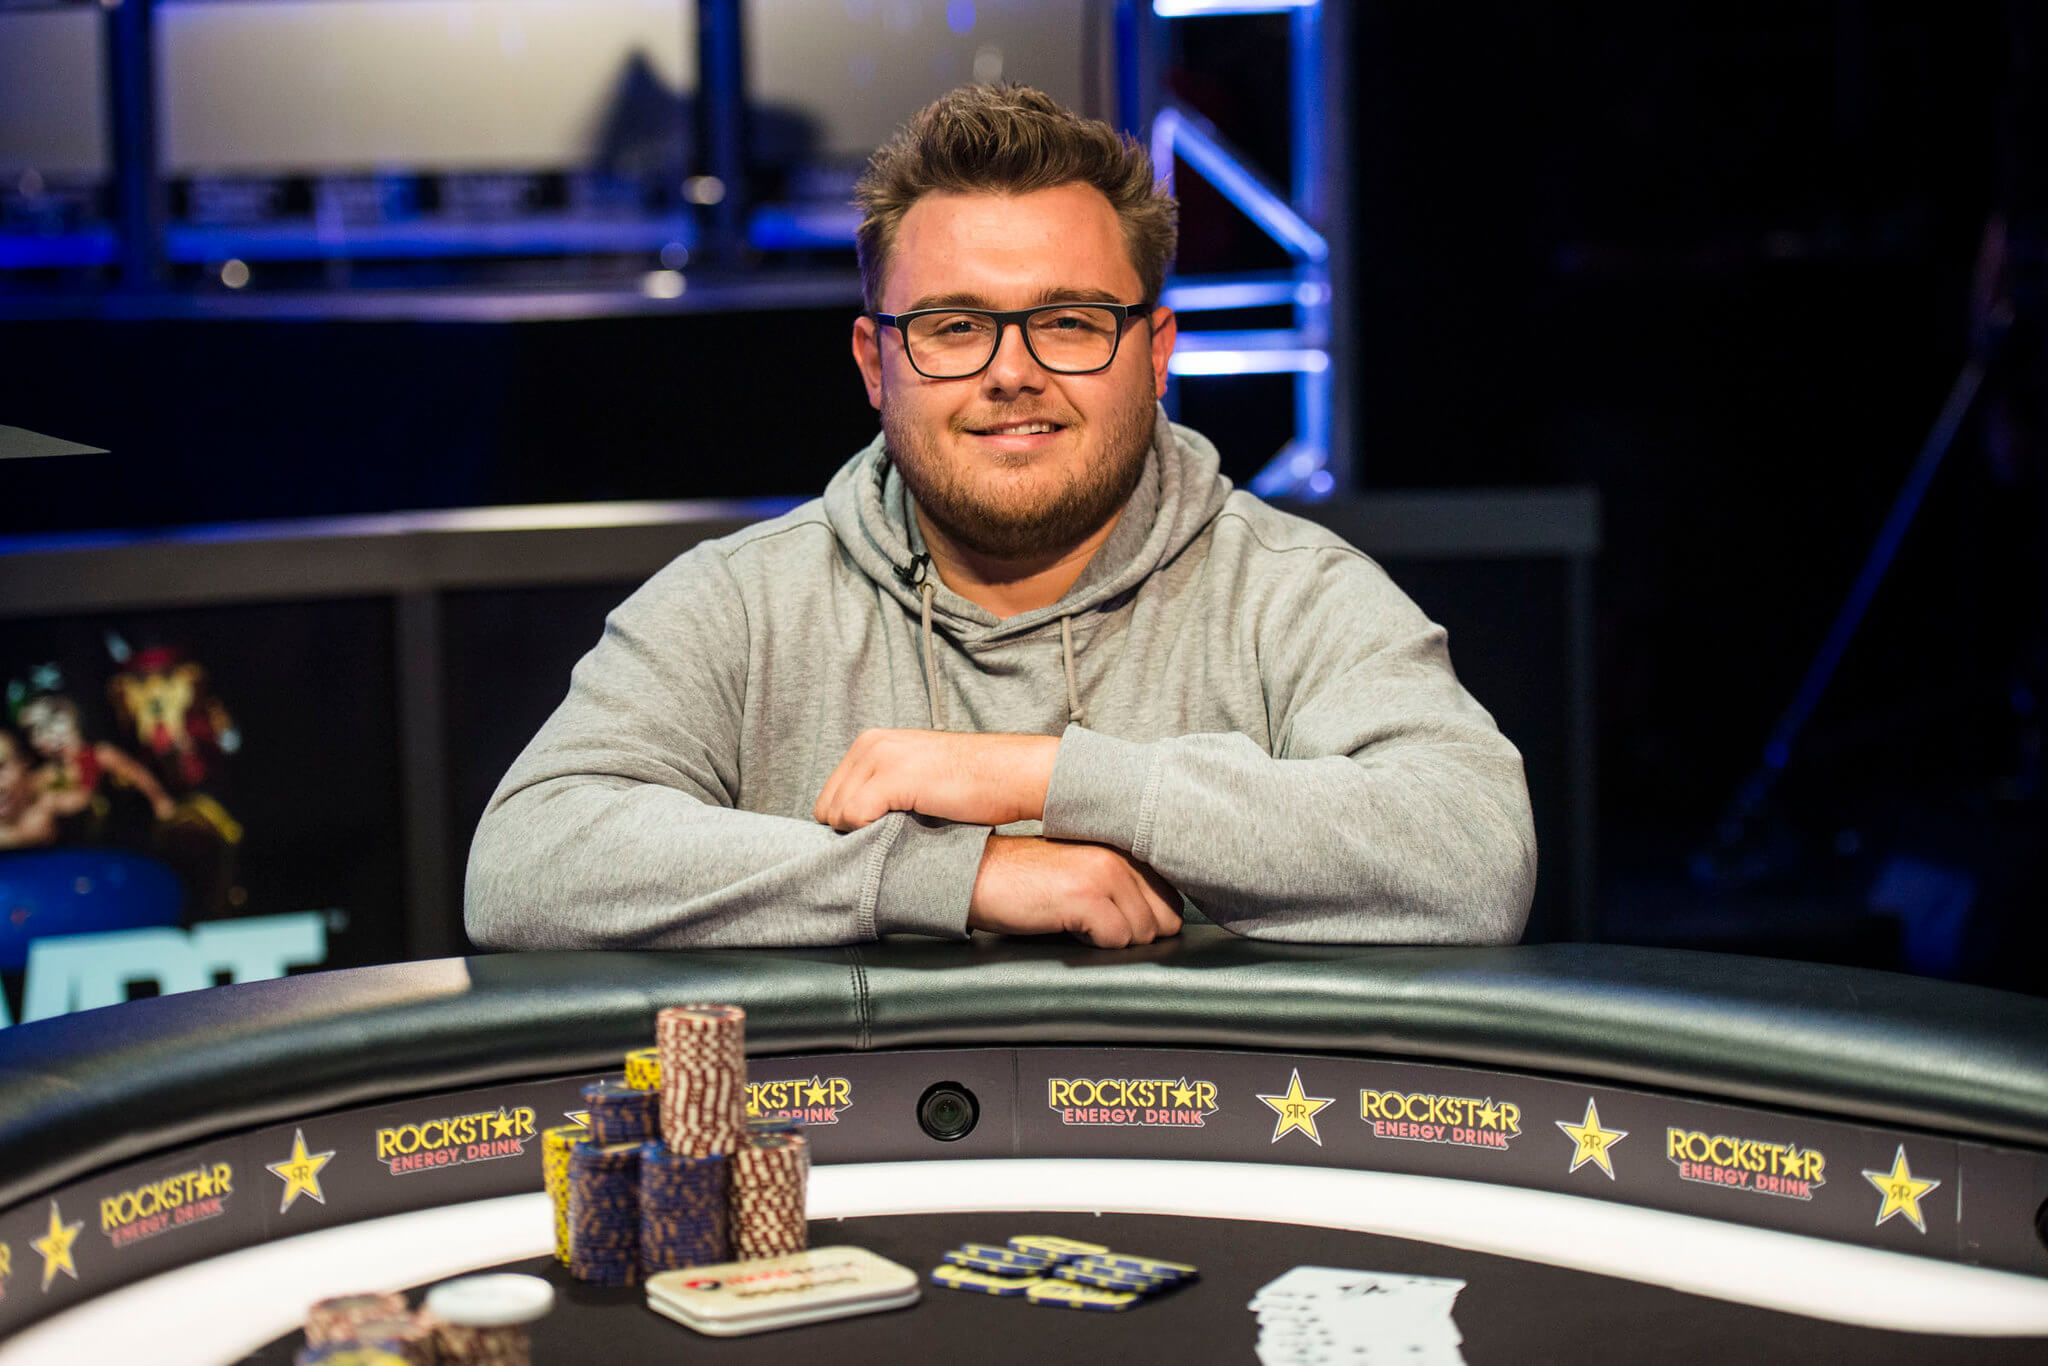 Sergei Denisov Wins GGPoker World Festival Event #6 For A Whopping $140,395.54